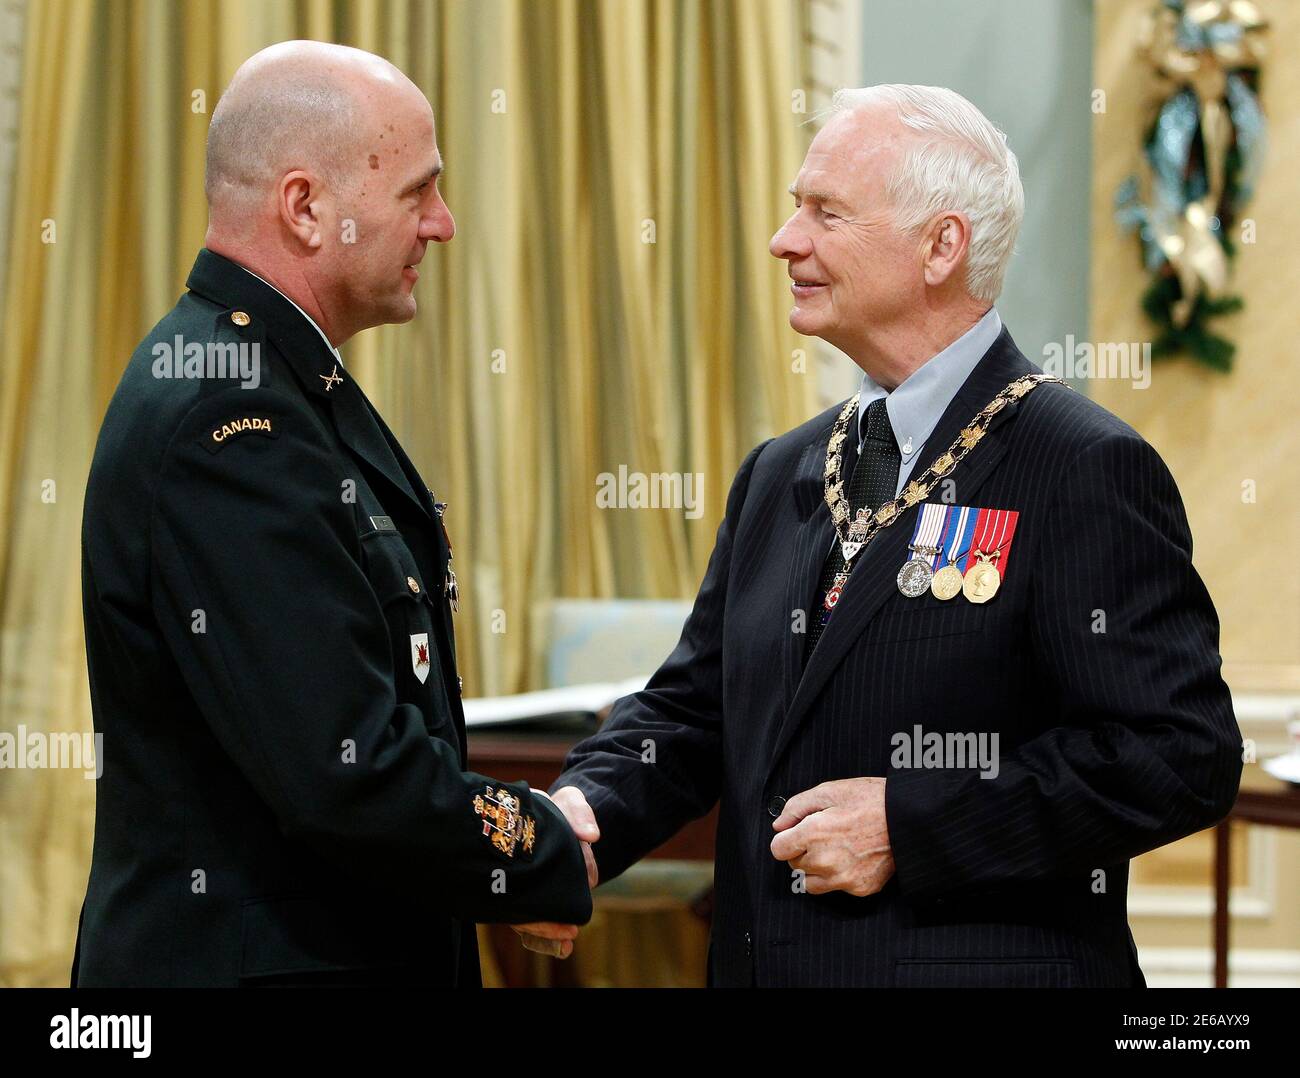 Canada's Governor General David Johnston (R) congratulates Chief Warrant Officer Armand Vinet for receiving the rank of Member in the Order of Military Merit at Rideau Hall in Ottawa December 9, 2010.     REUTERS/Blair Gable     (CANADA - Tags: POLITICS MILITARY) Stock Photo